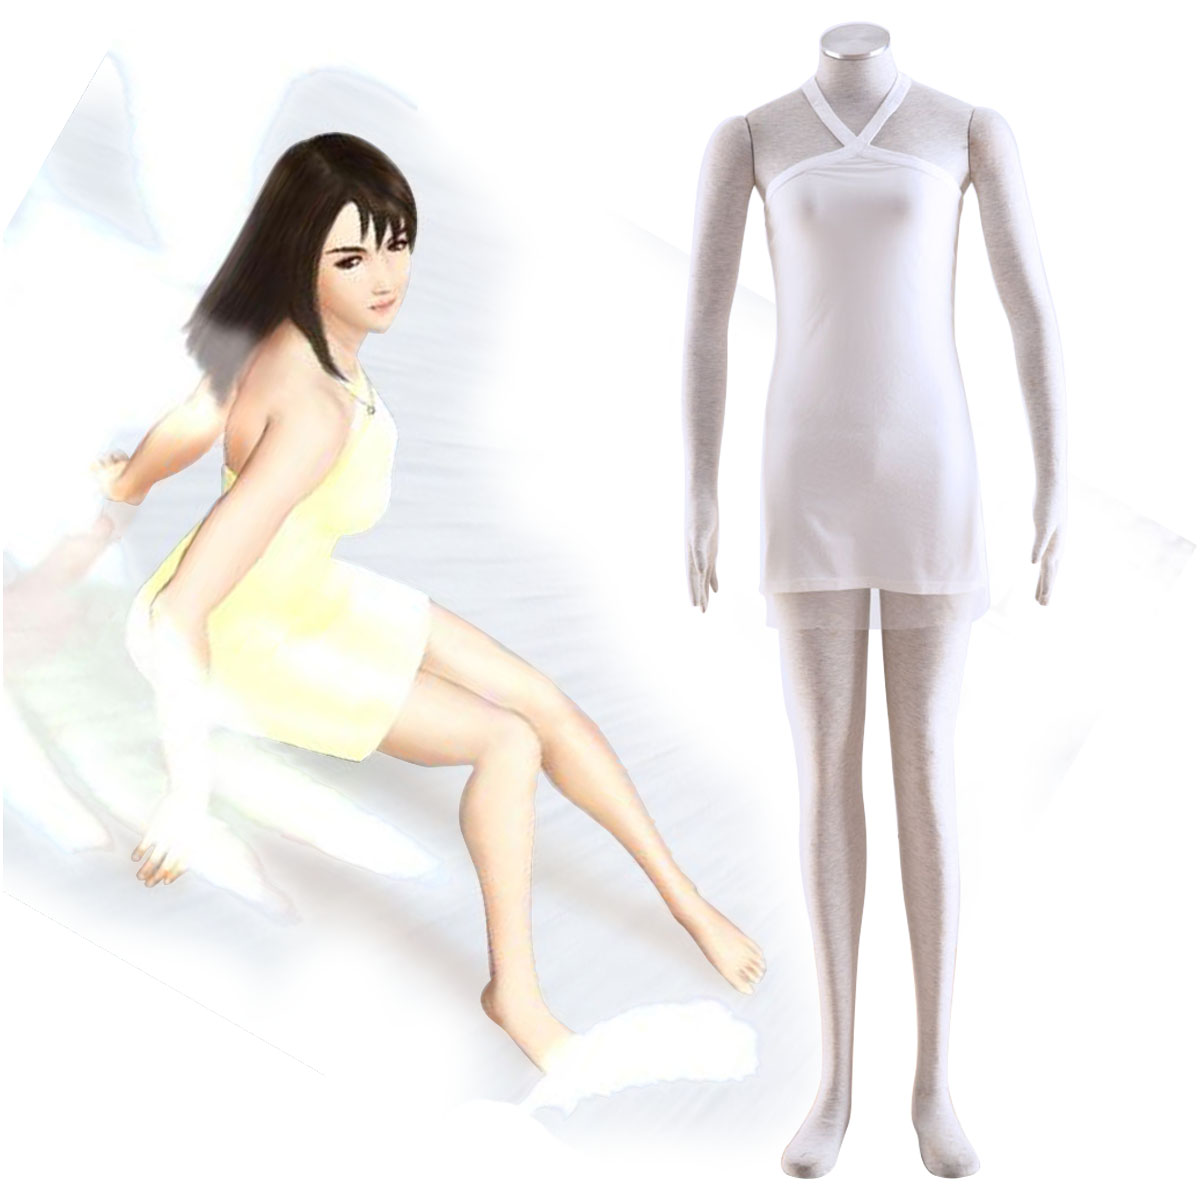 Final Fantasy VIII Rinoa Heartilly 2 Anime Cosplay Costumes Outfit